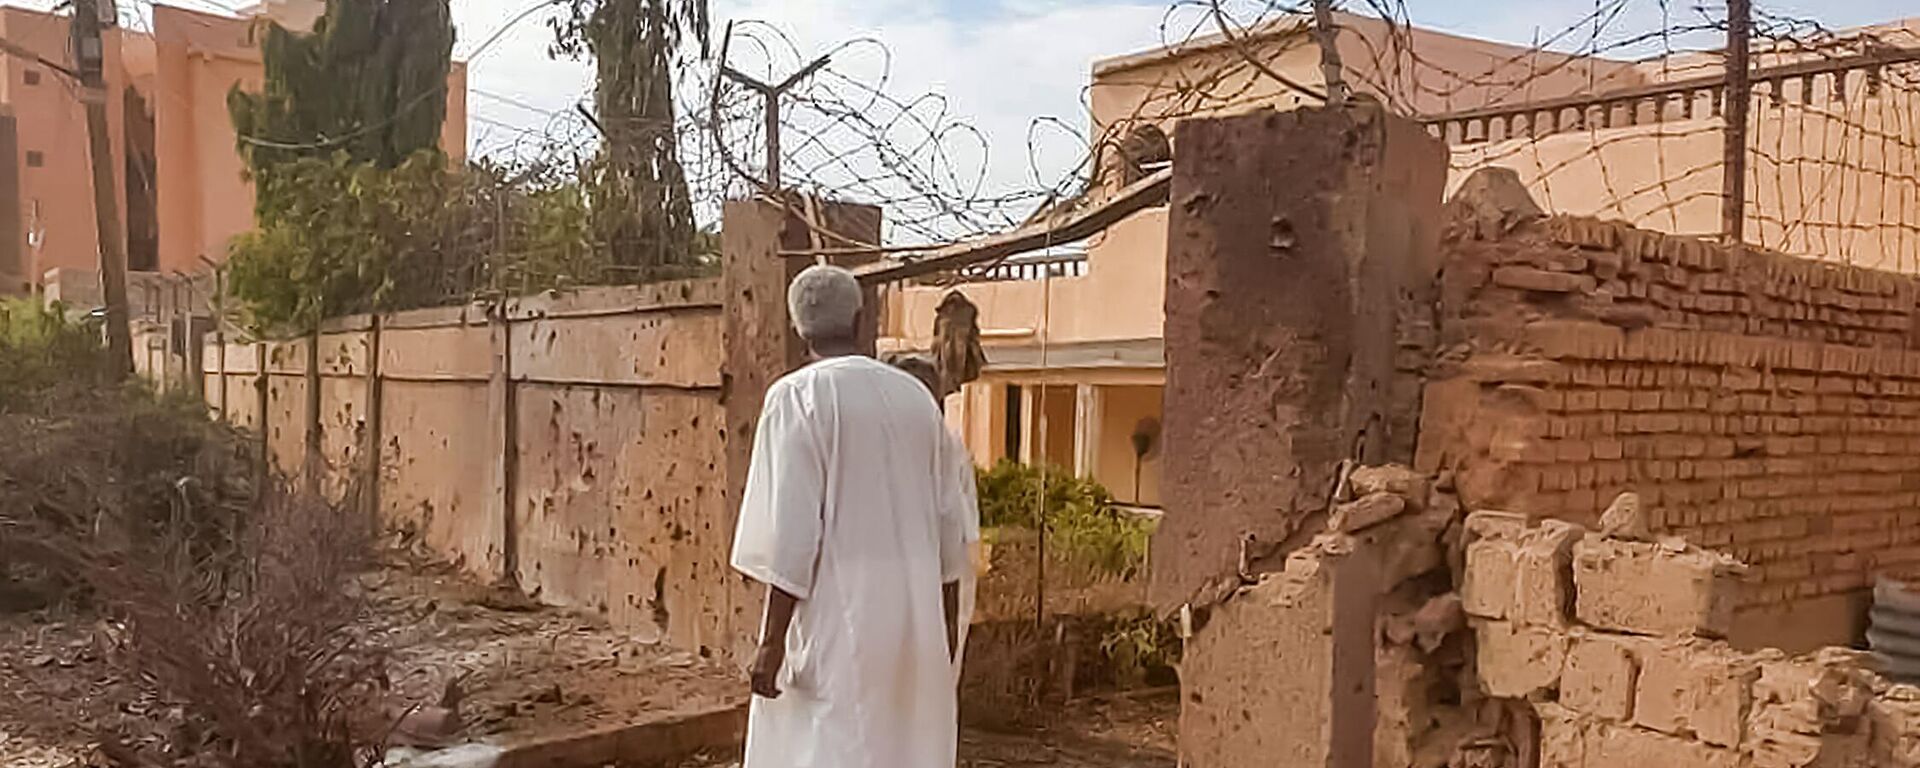 A man walks through rubble by a bullet-riddled fence with barbed-wire, in the aftermath of clashes and bombardment in the Ombada suburb on the western outskirts of Omdurman, the twin-city of Sudan's capital, on July 4, 2023. - Sputnik Africa, 1920, 21.11.2023